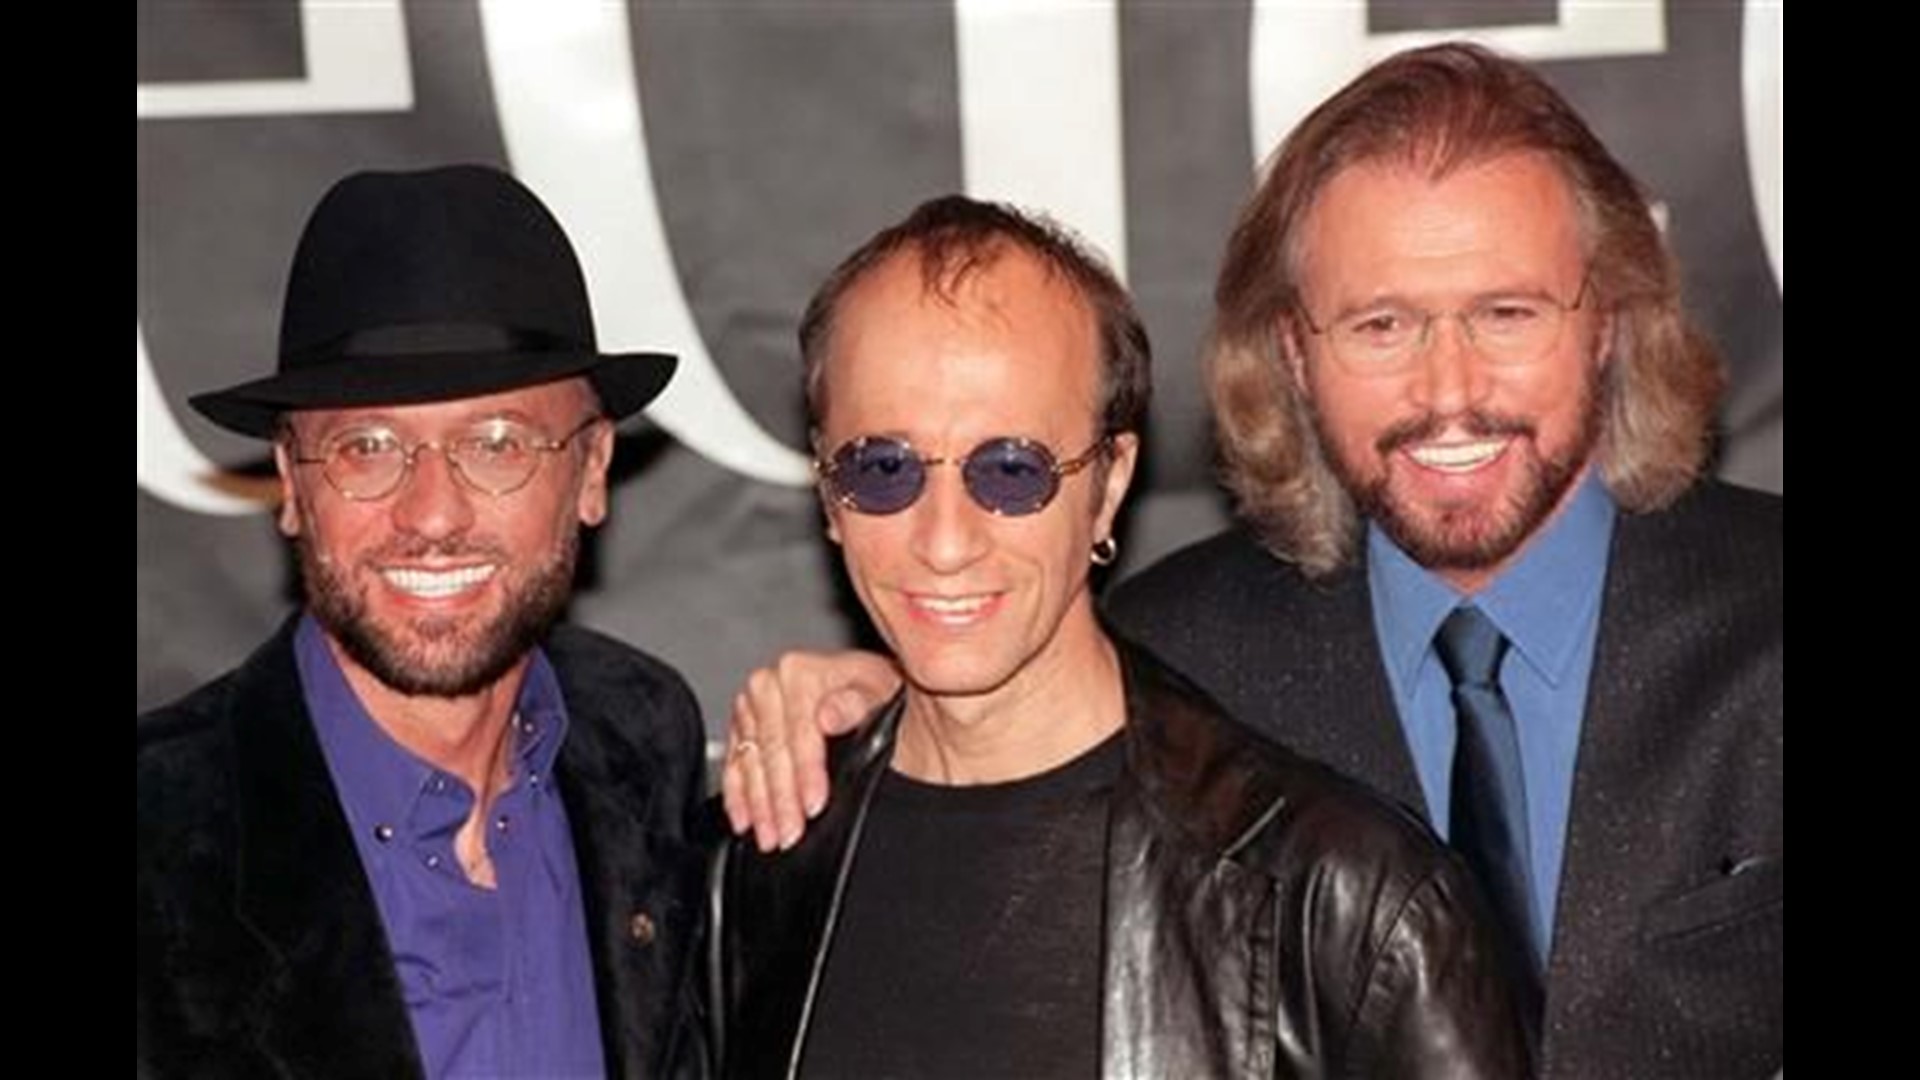 Grammys, CBS to honor Bee Gees with tribute concert